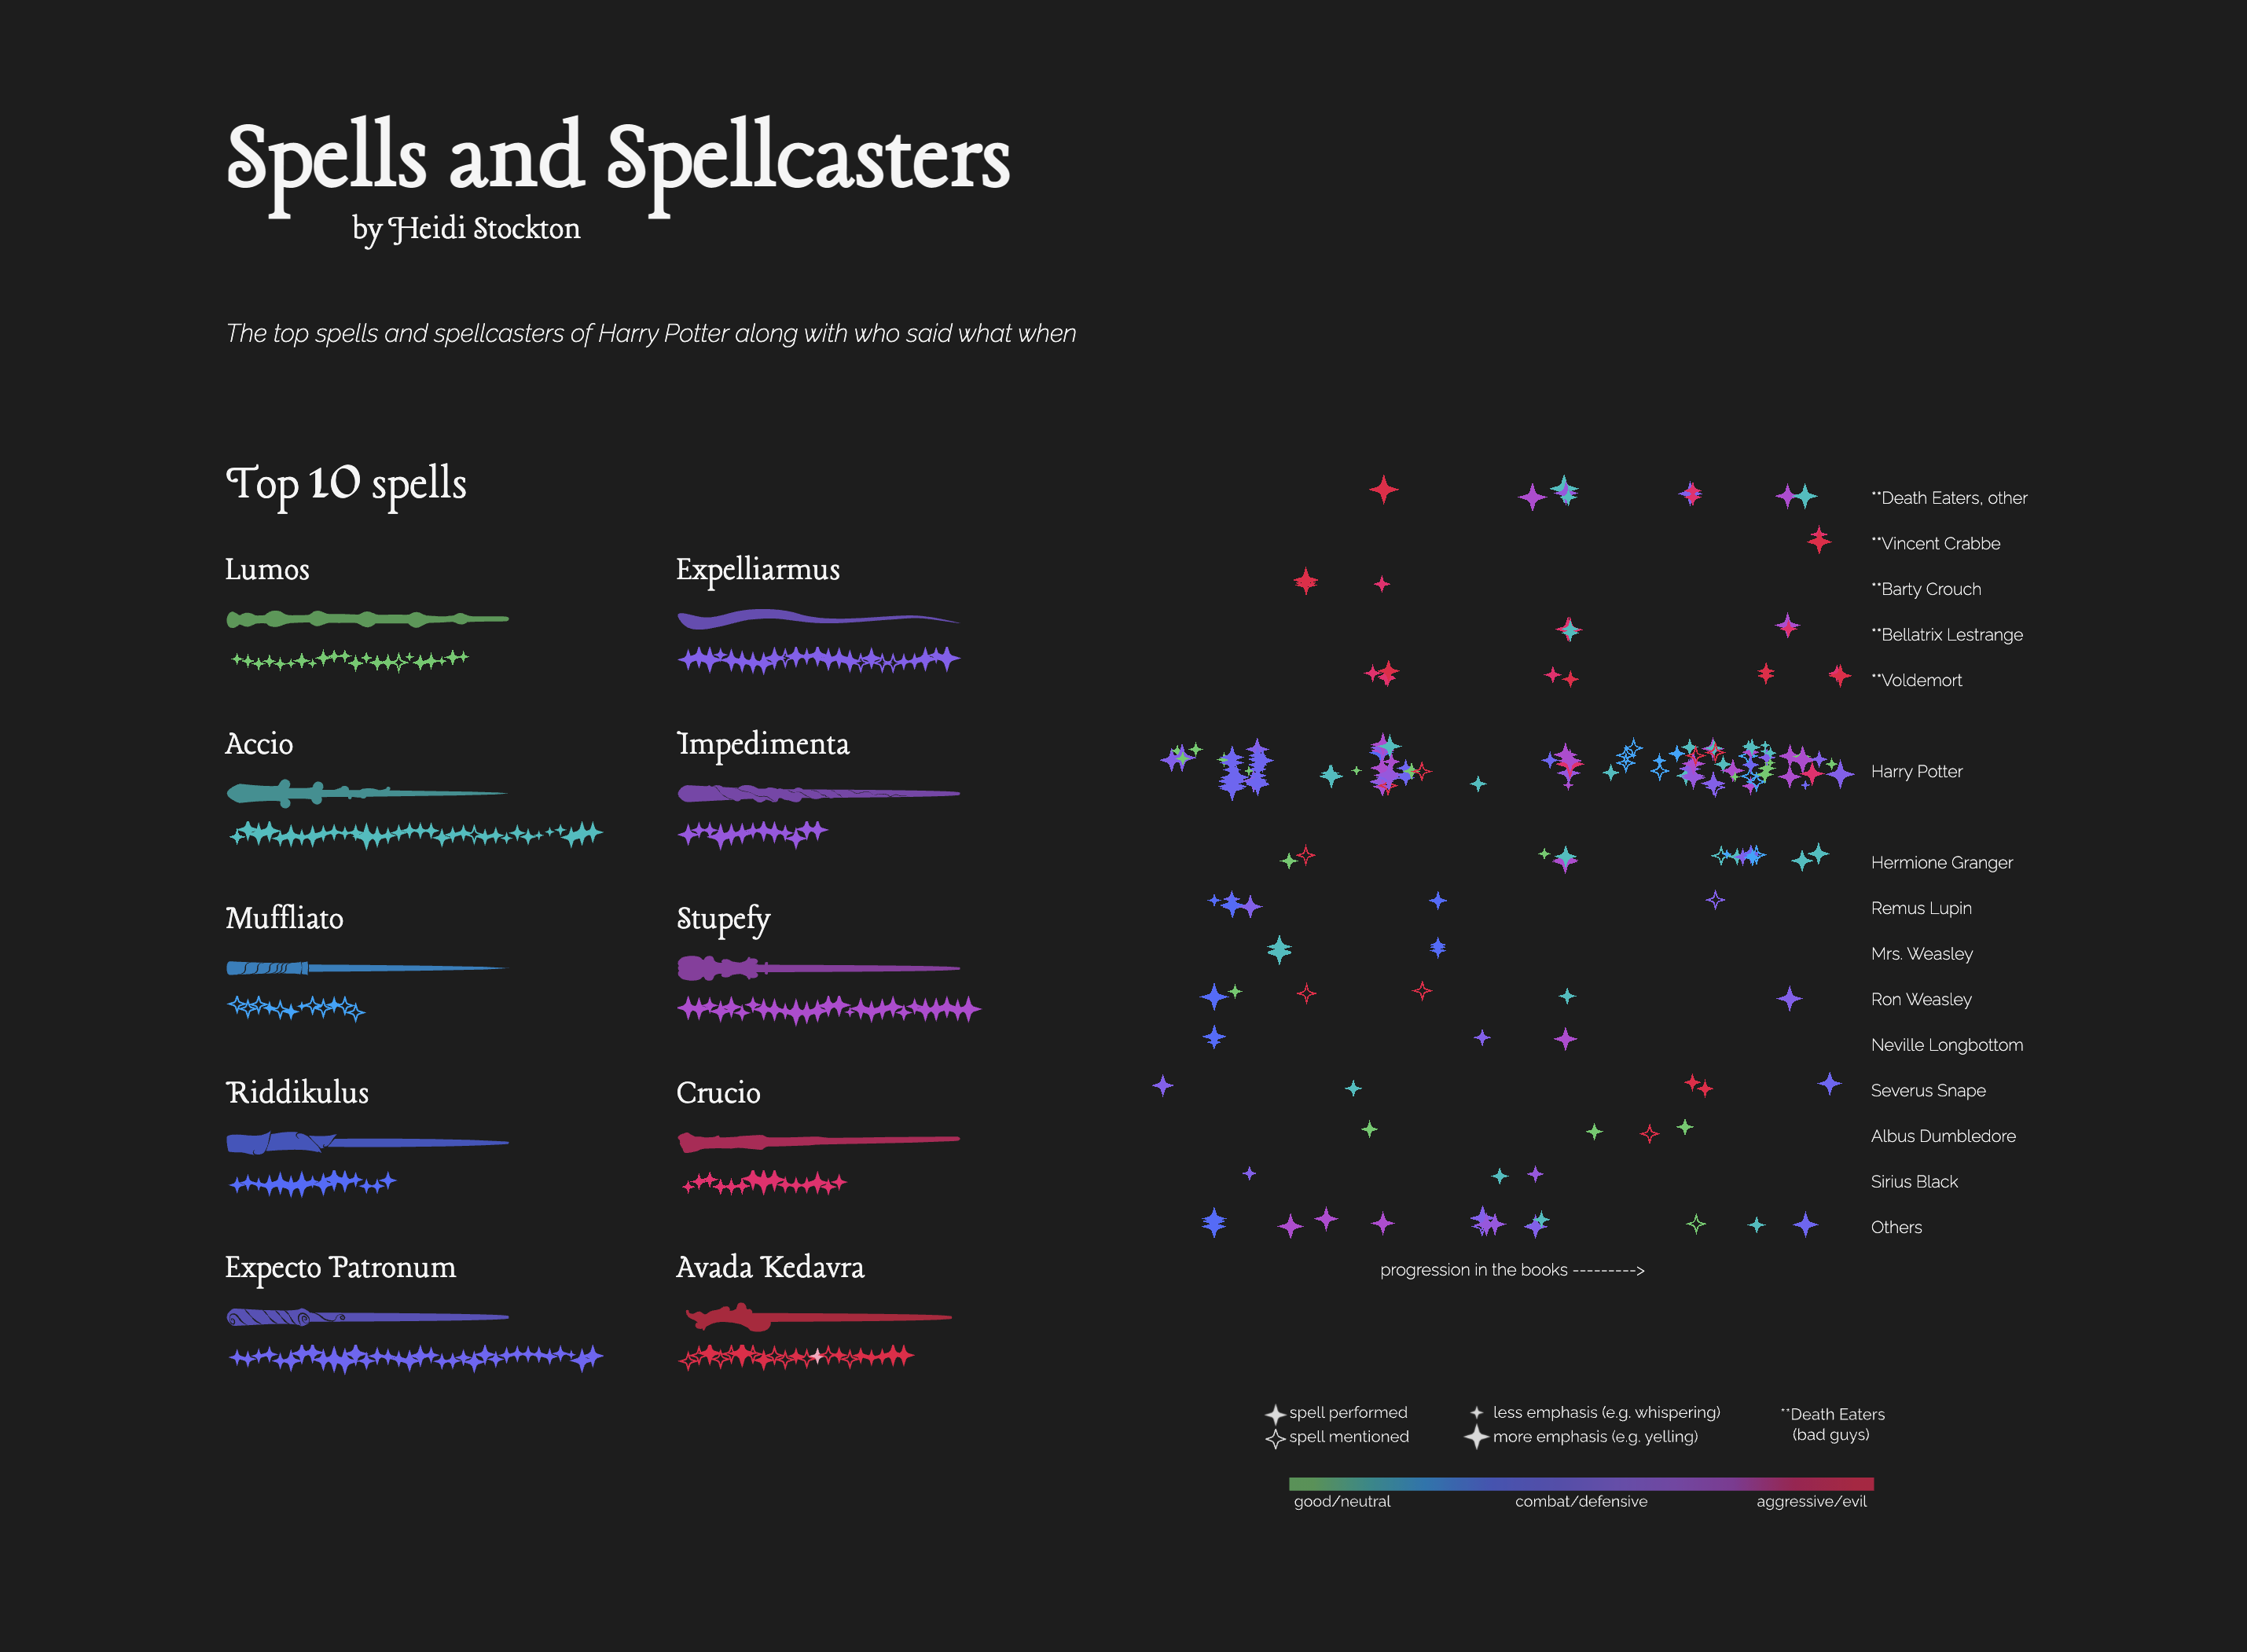 A data visualization illustrating the spells and spellcasters of Harry Potter